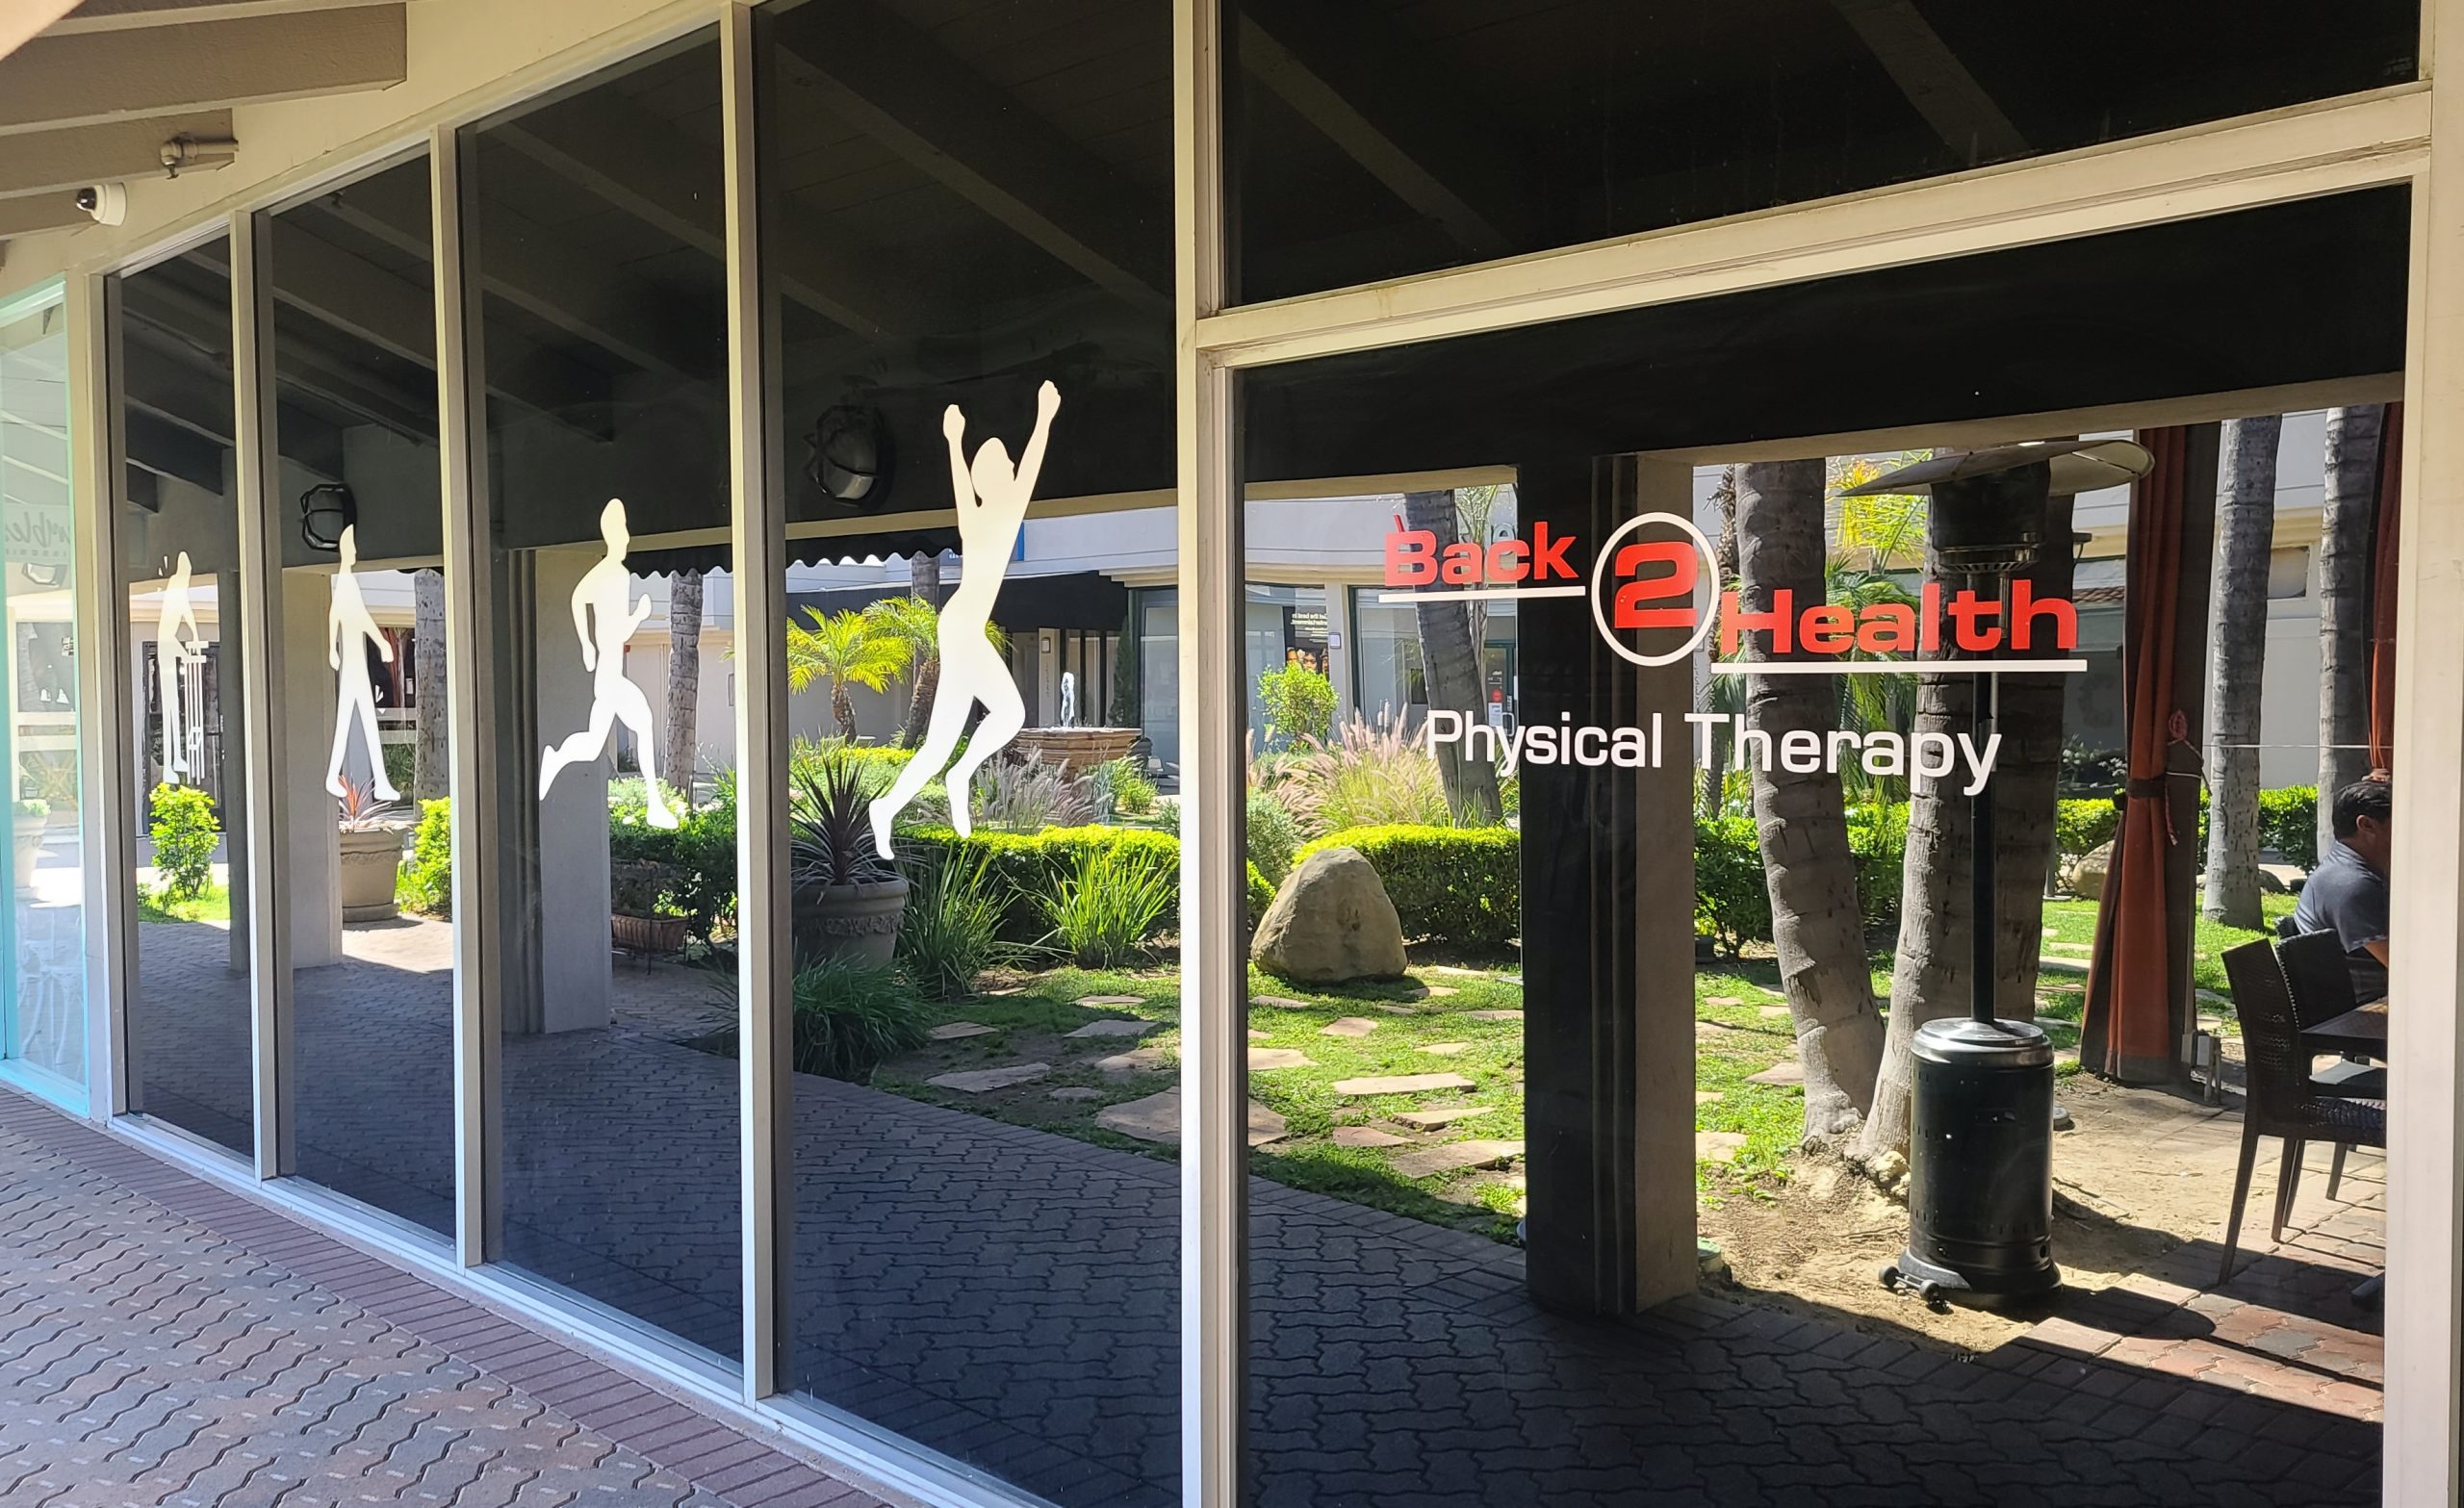 You are currently viewing Building Window Graphics for Back 2 Health in Encino